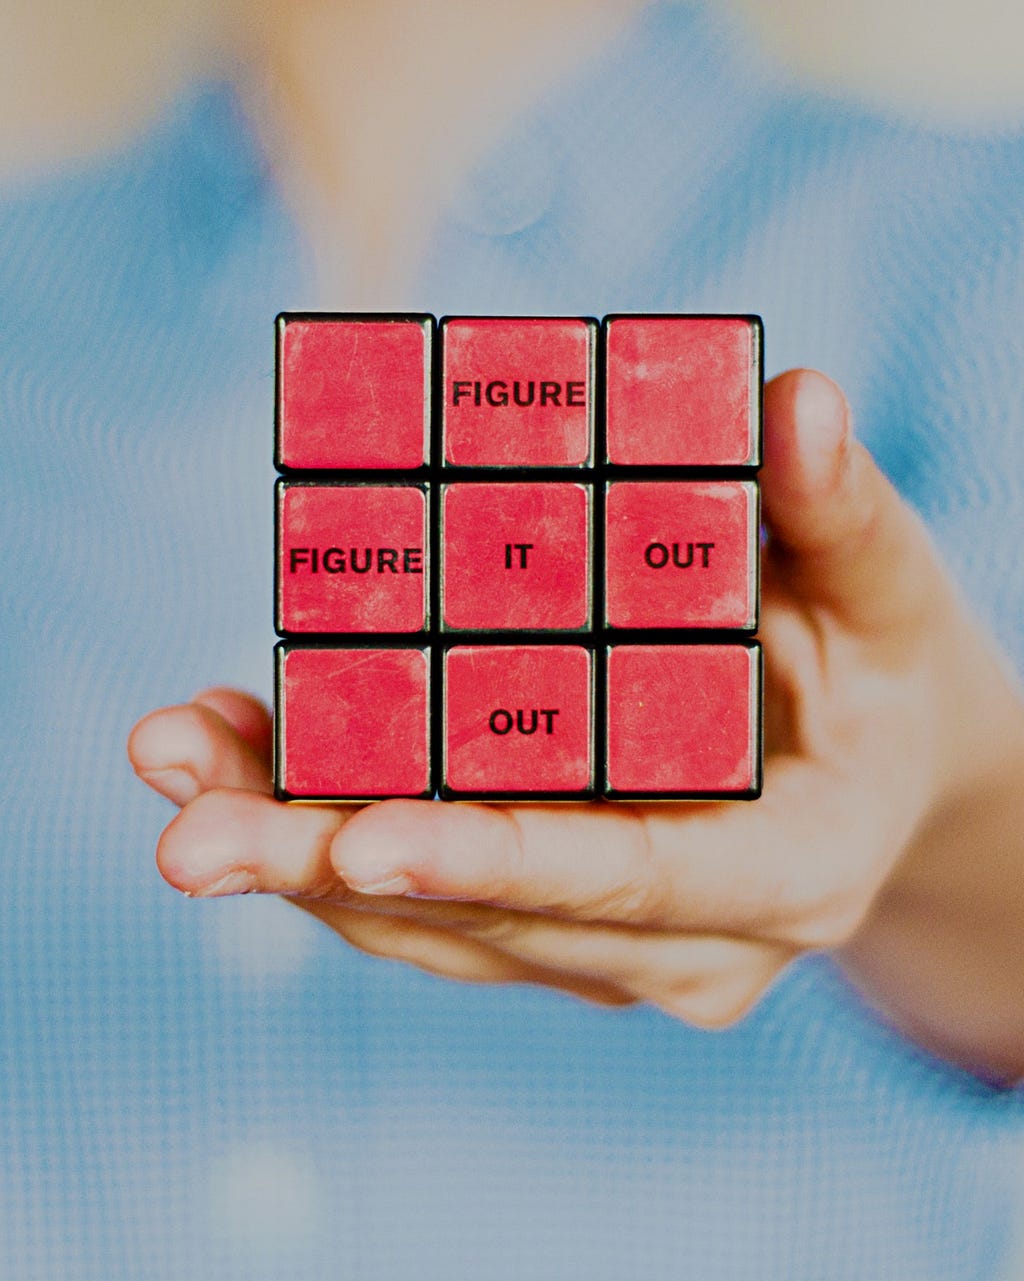 A rubik’s cube with the legend “Figure it out”